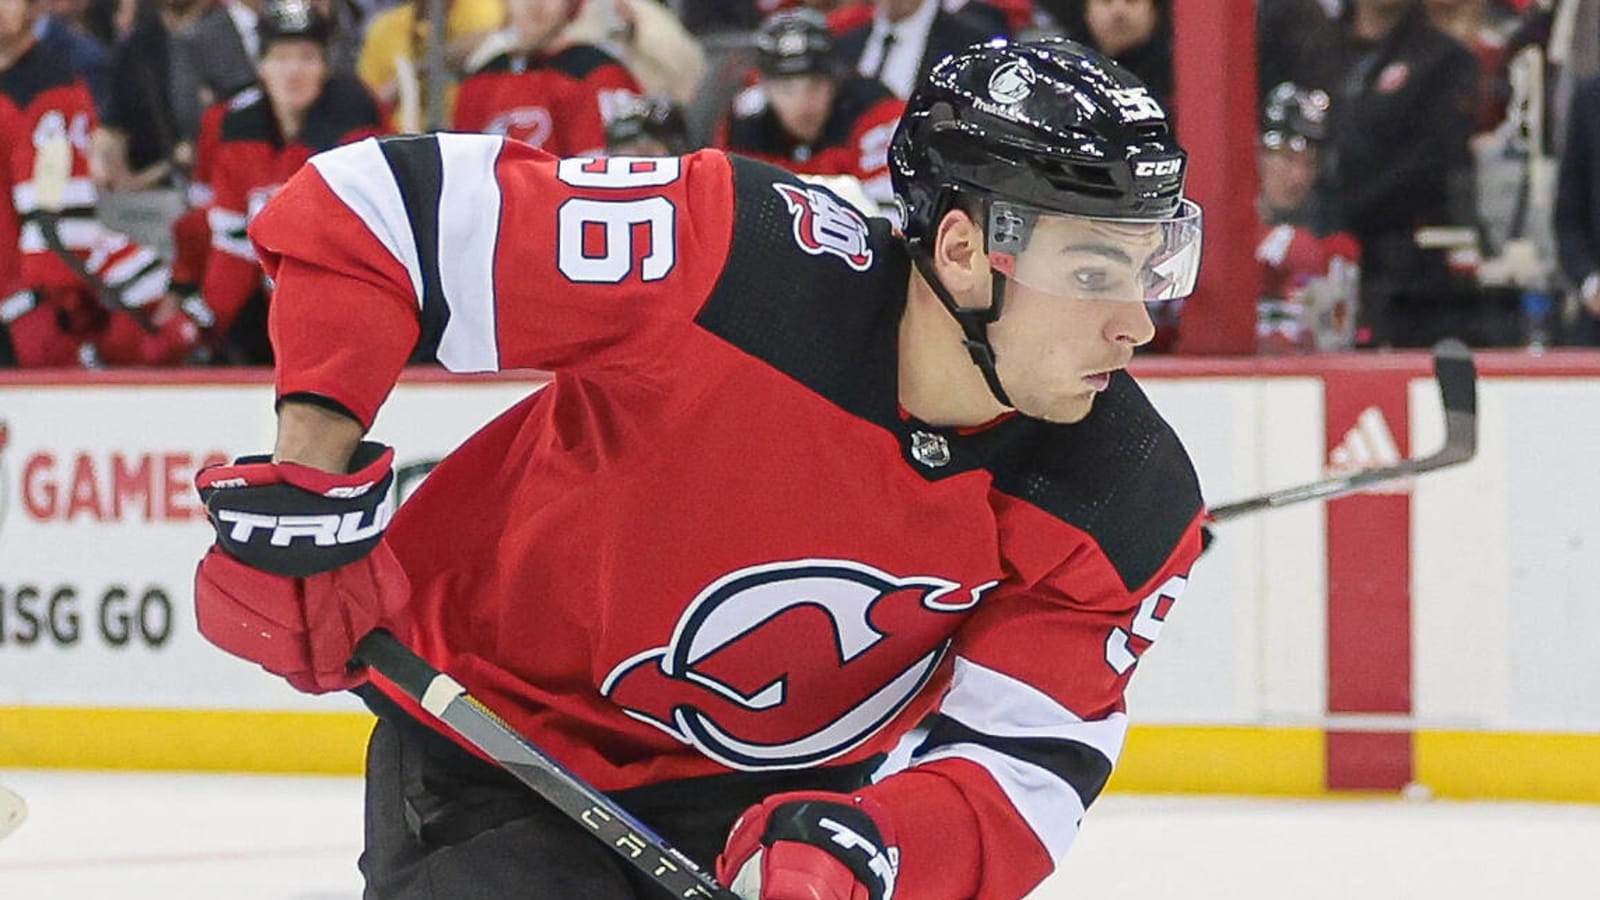 Devils expected to file for arbitration with winger